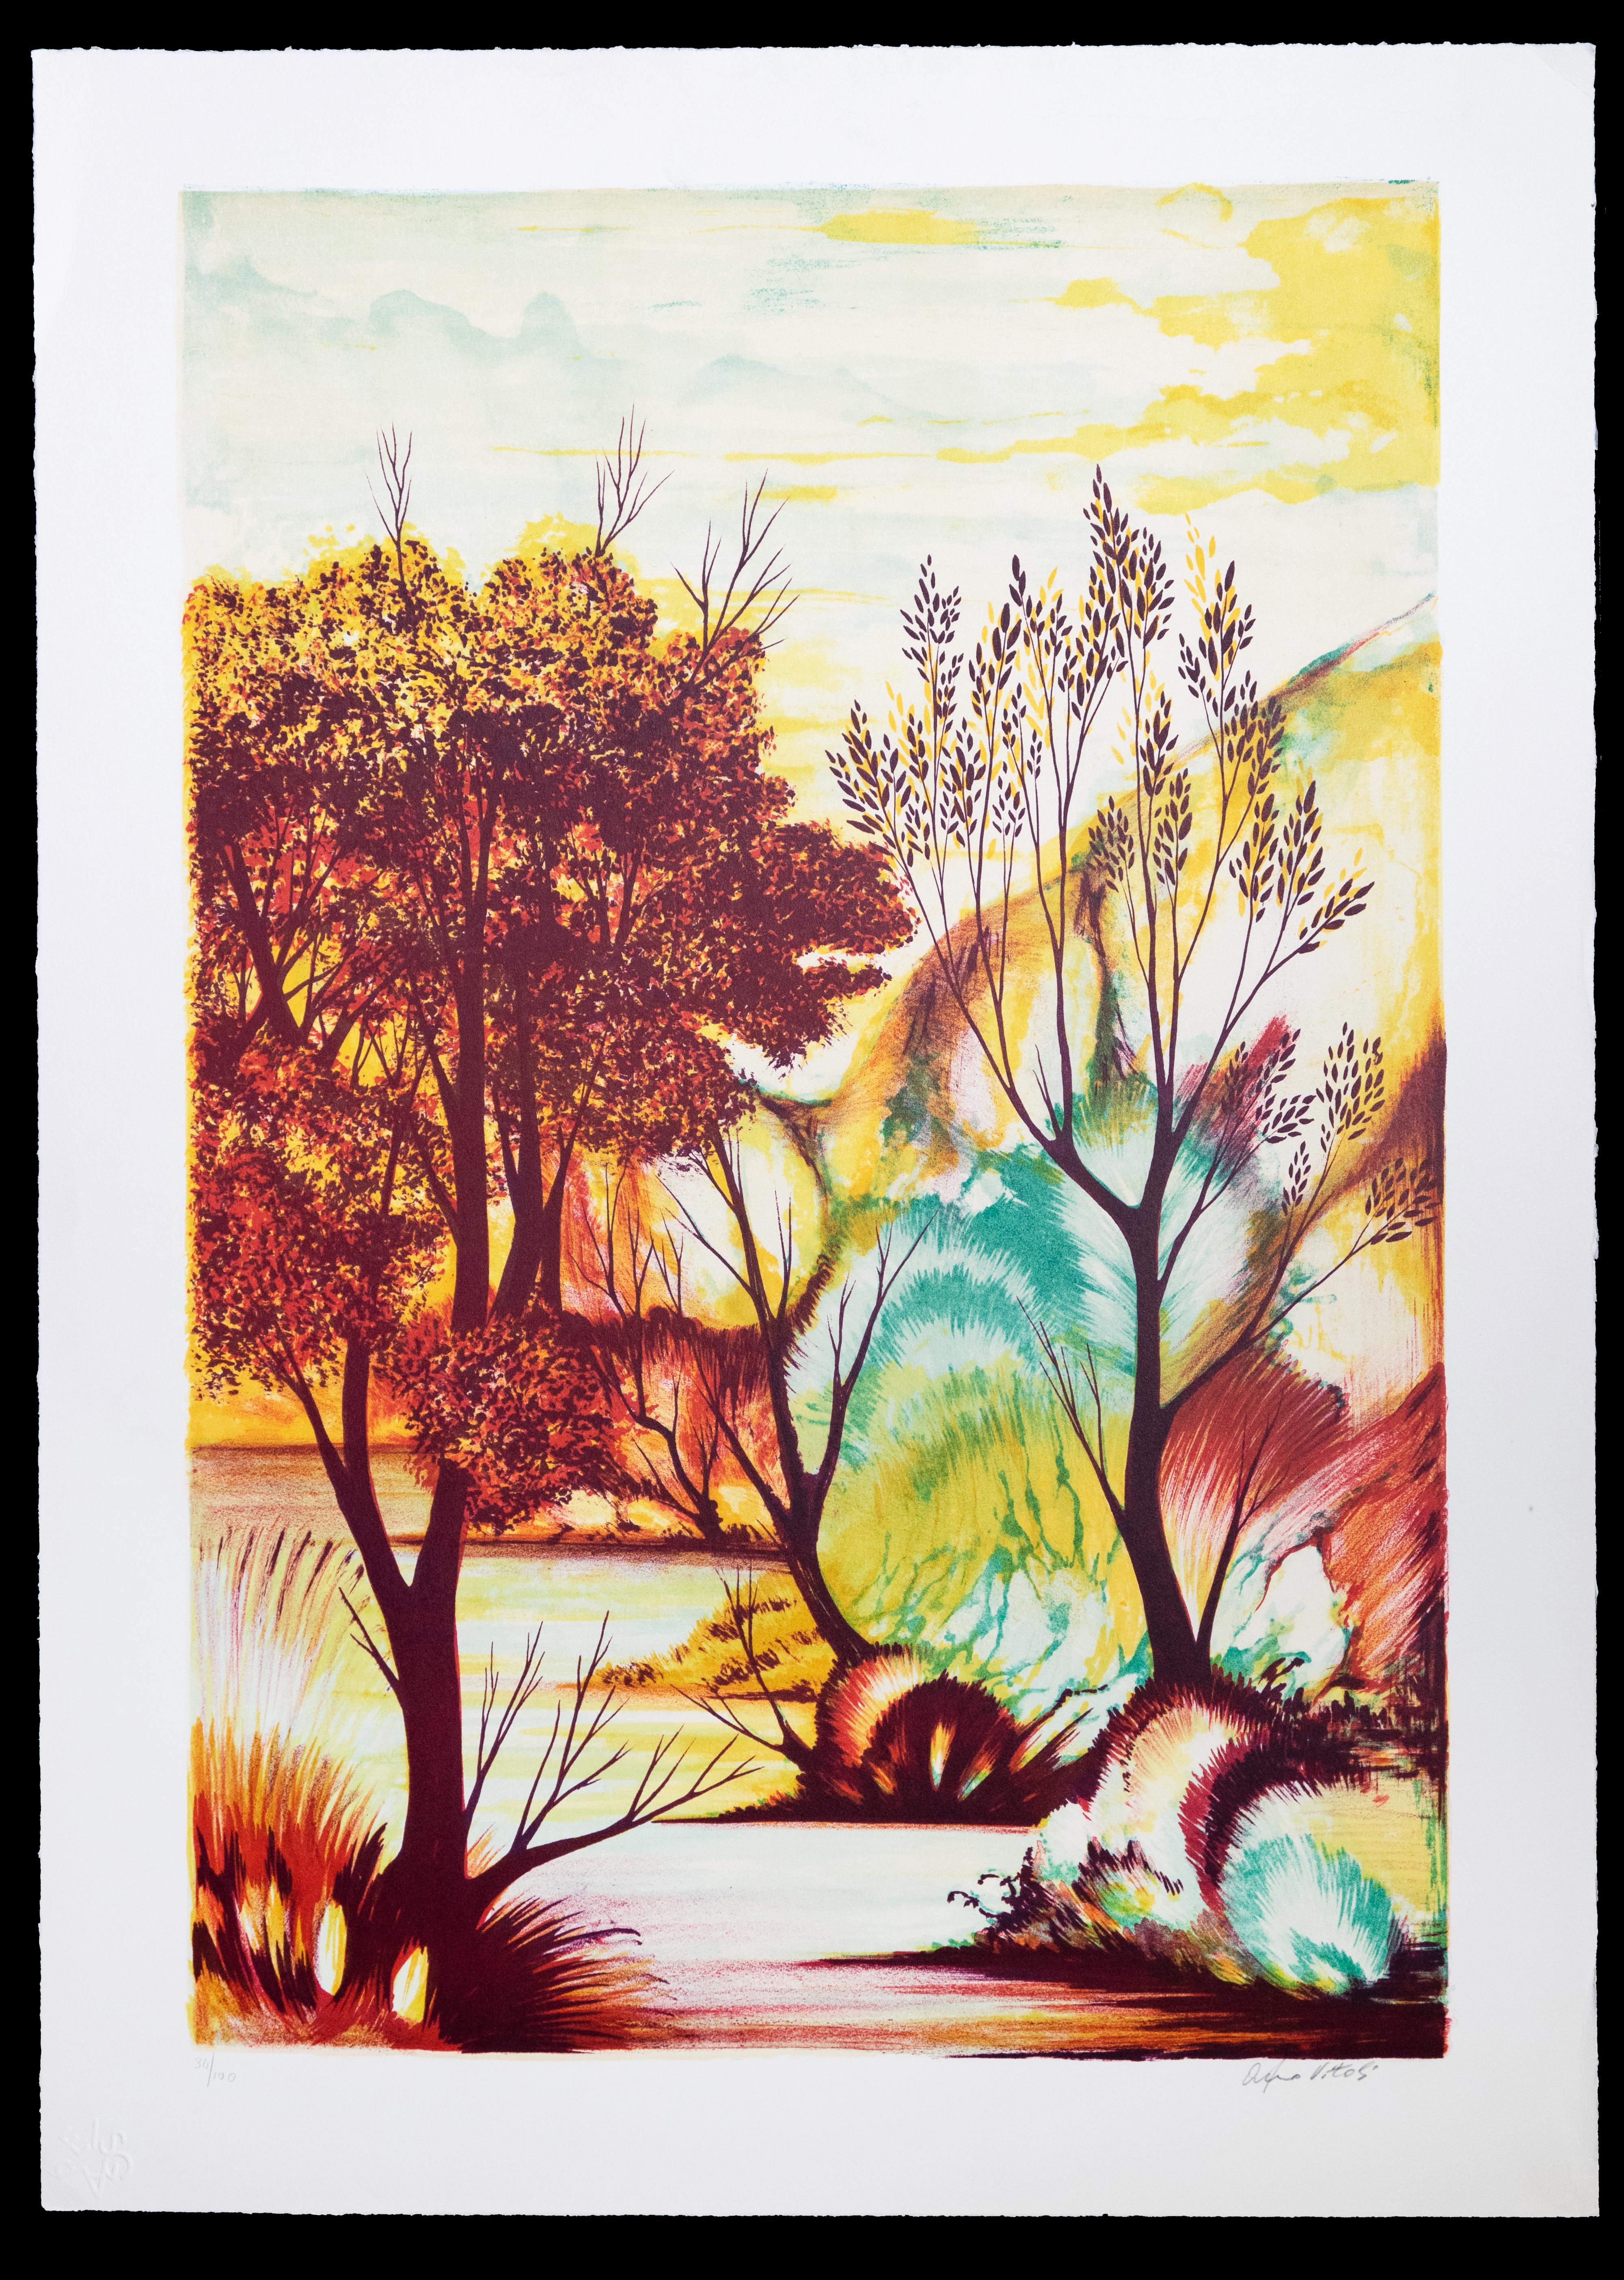 Edition of 100 prints, hand signed. Beautiful representation of Autumn colors, designed by the italian artist Orfeo Vitali and printed by Atelier Franco Cioppi.	
Ausgezeichneter Zustand.
